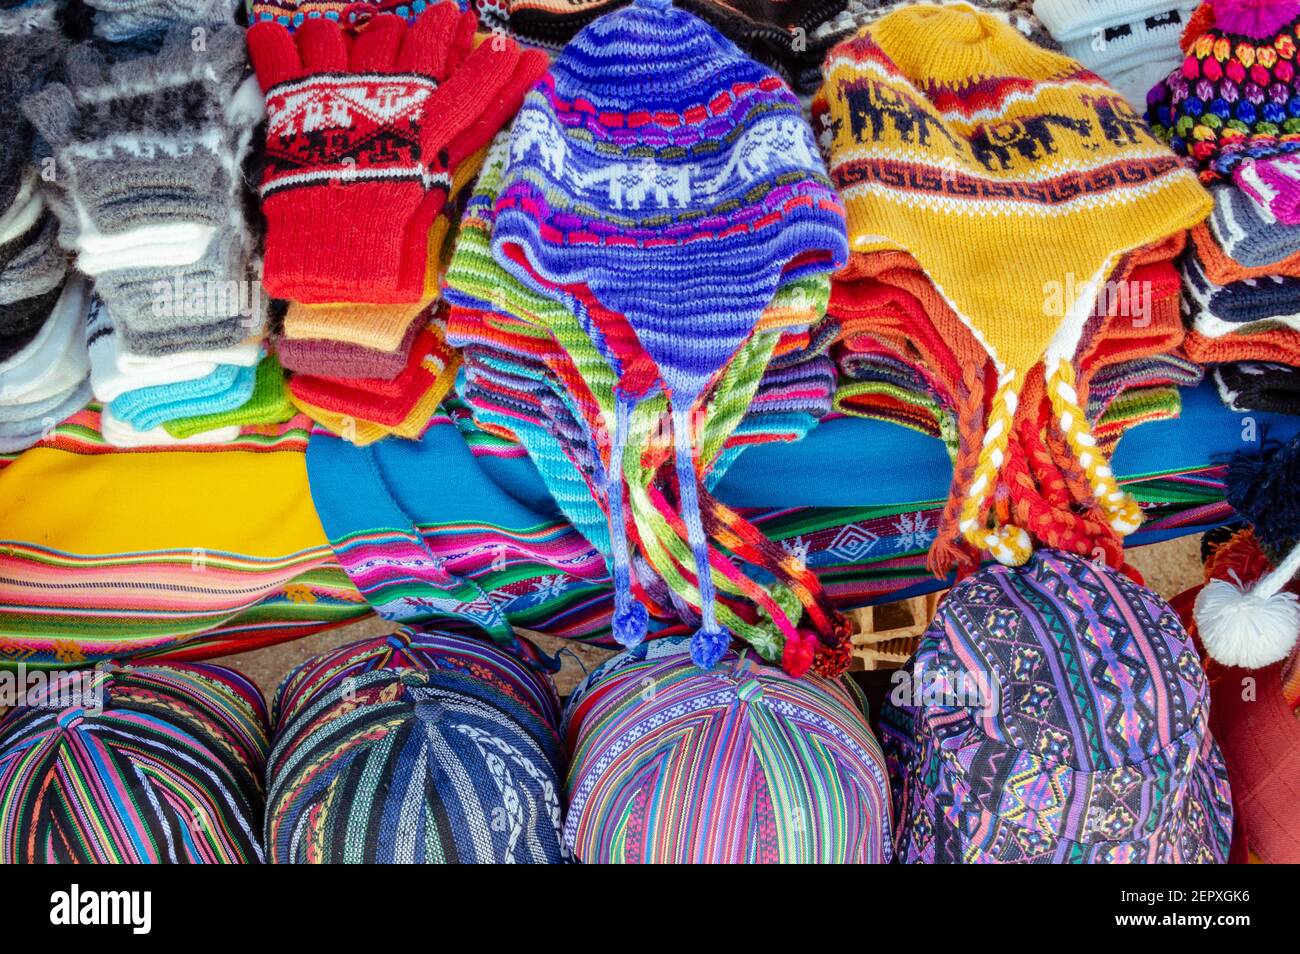 Traditional and colorful artesany in Bolivia Stock Photo